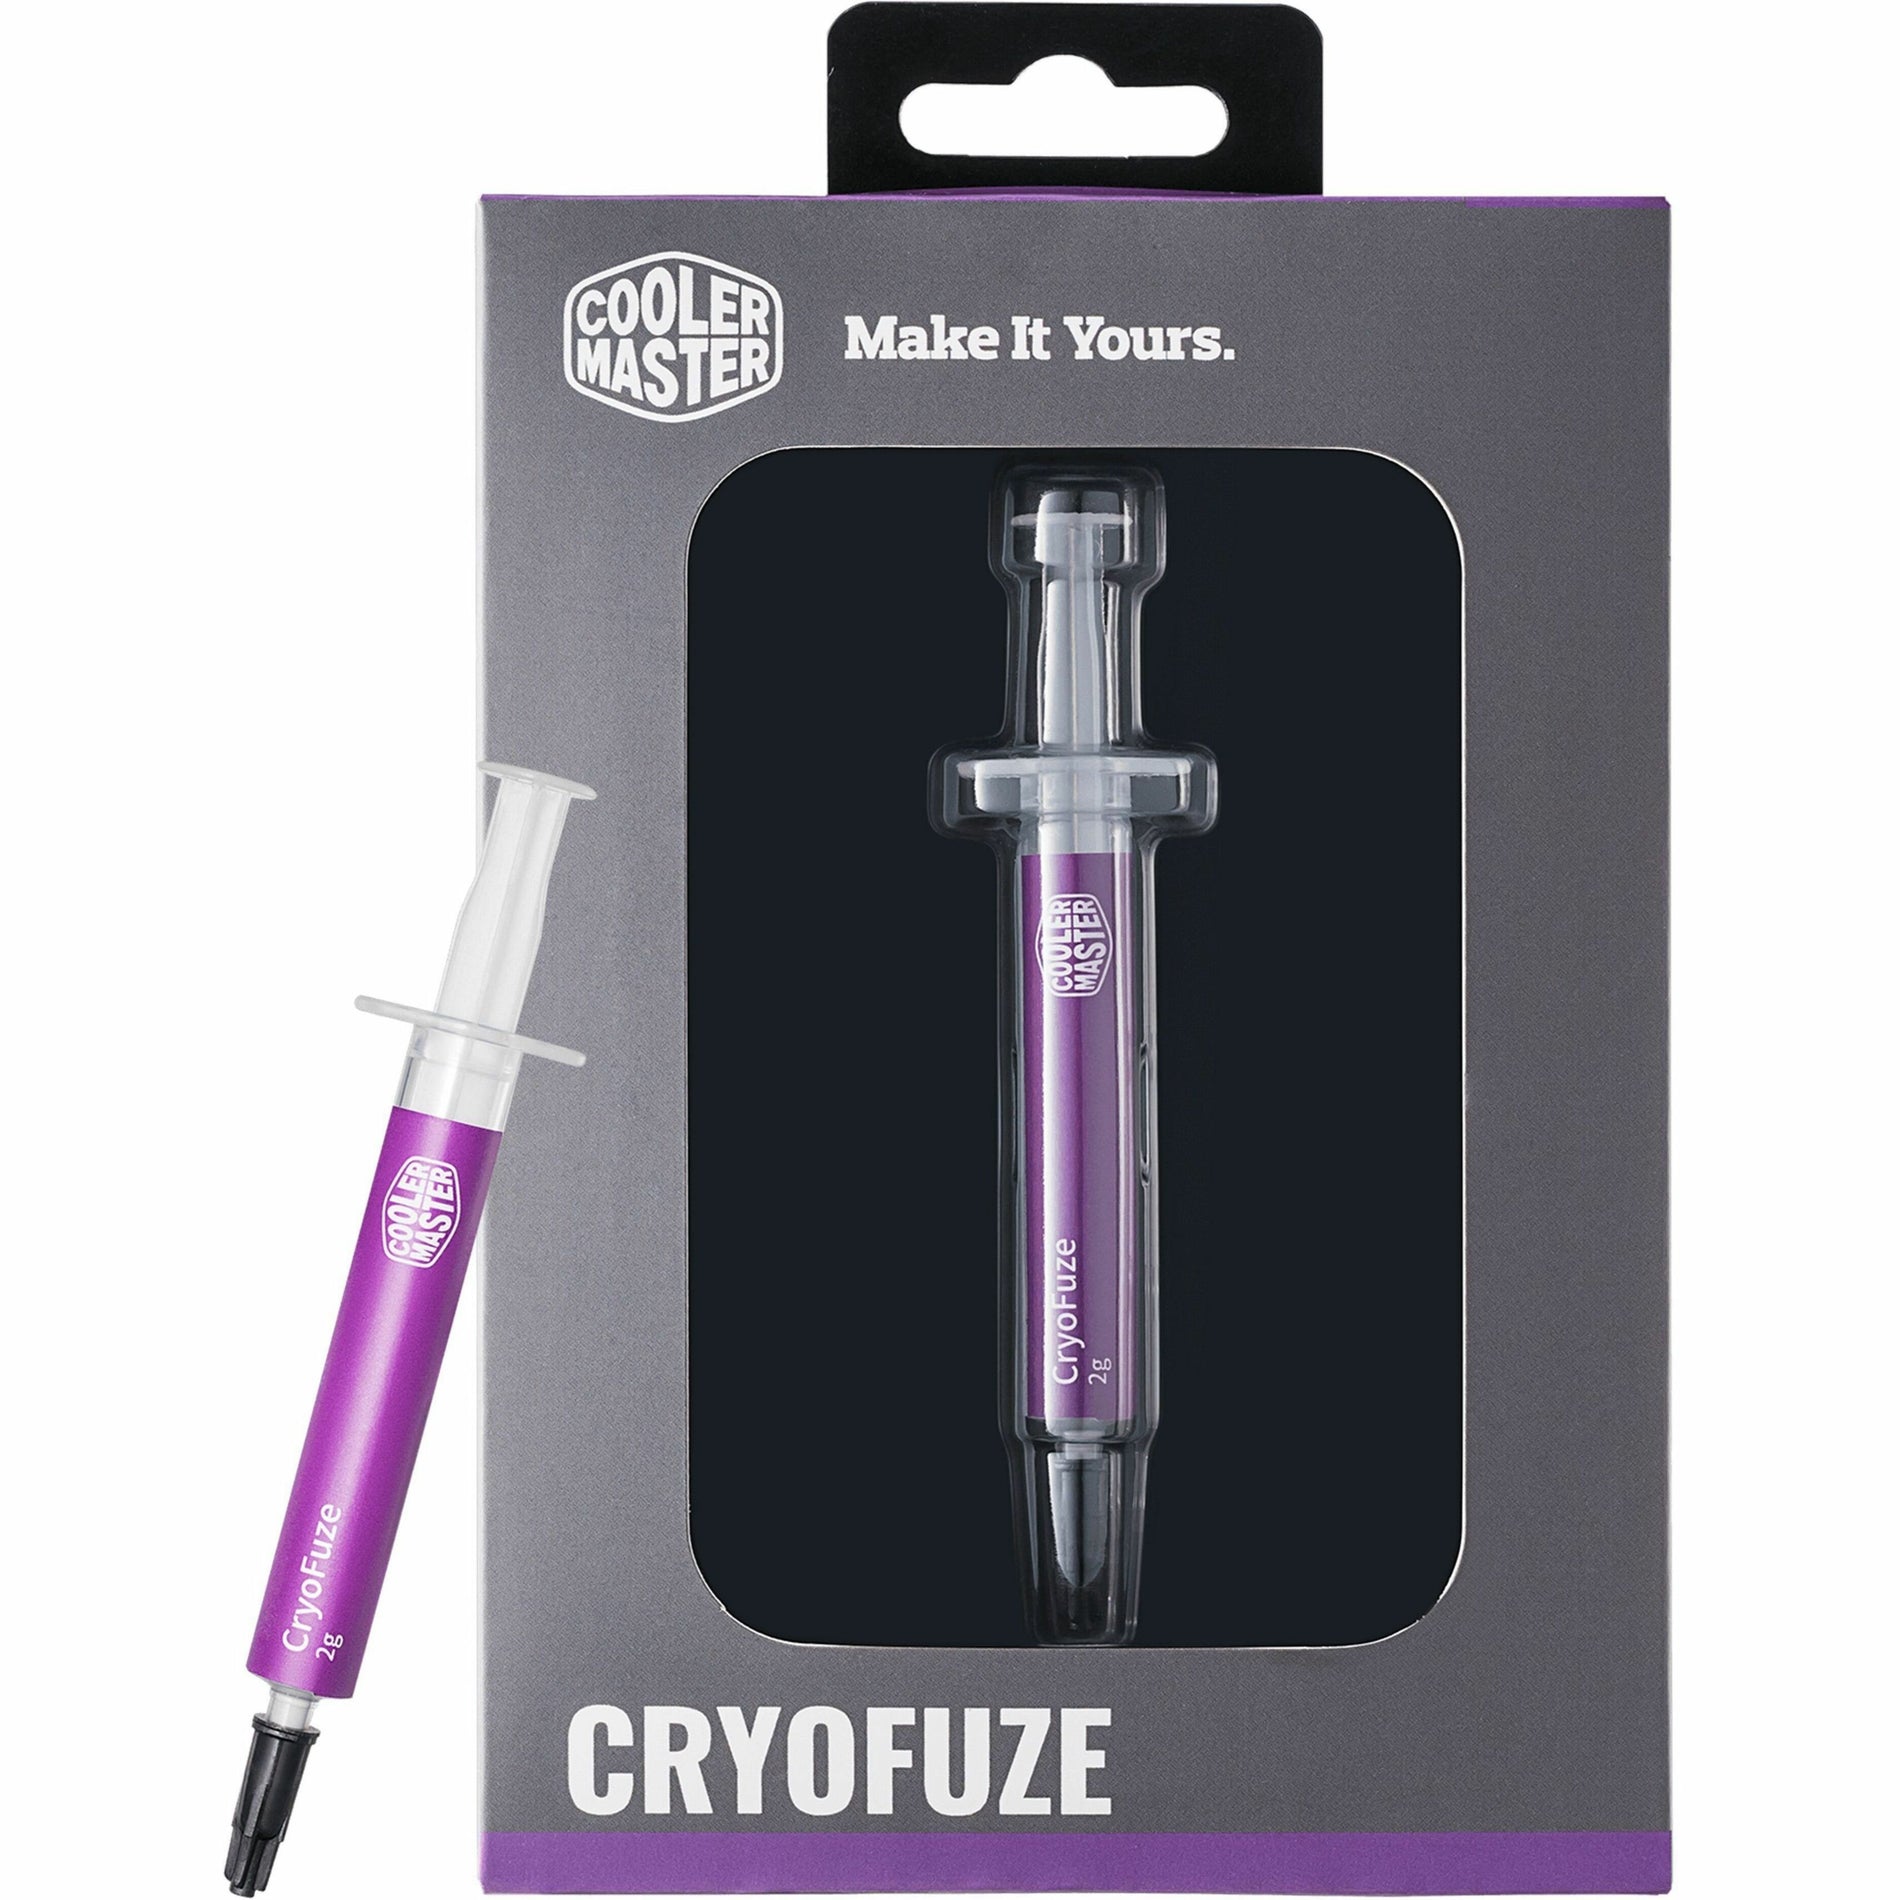 Cooler Master MGZ-NDSG-N07M-R2 Thermal Grease CryoFuze, High Performance Thermal Paste for Efficient Heat Transfer